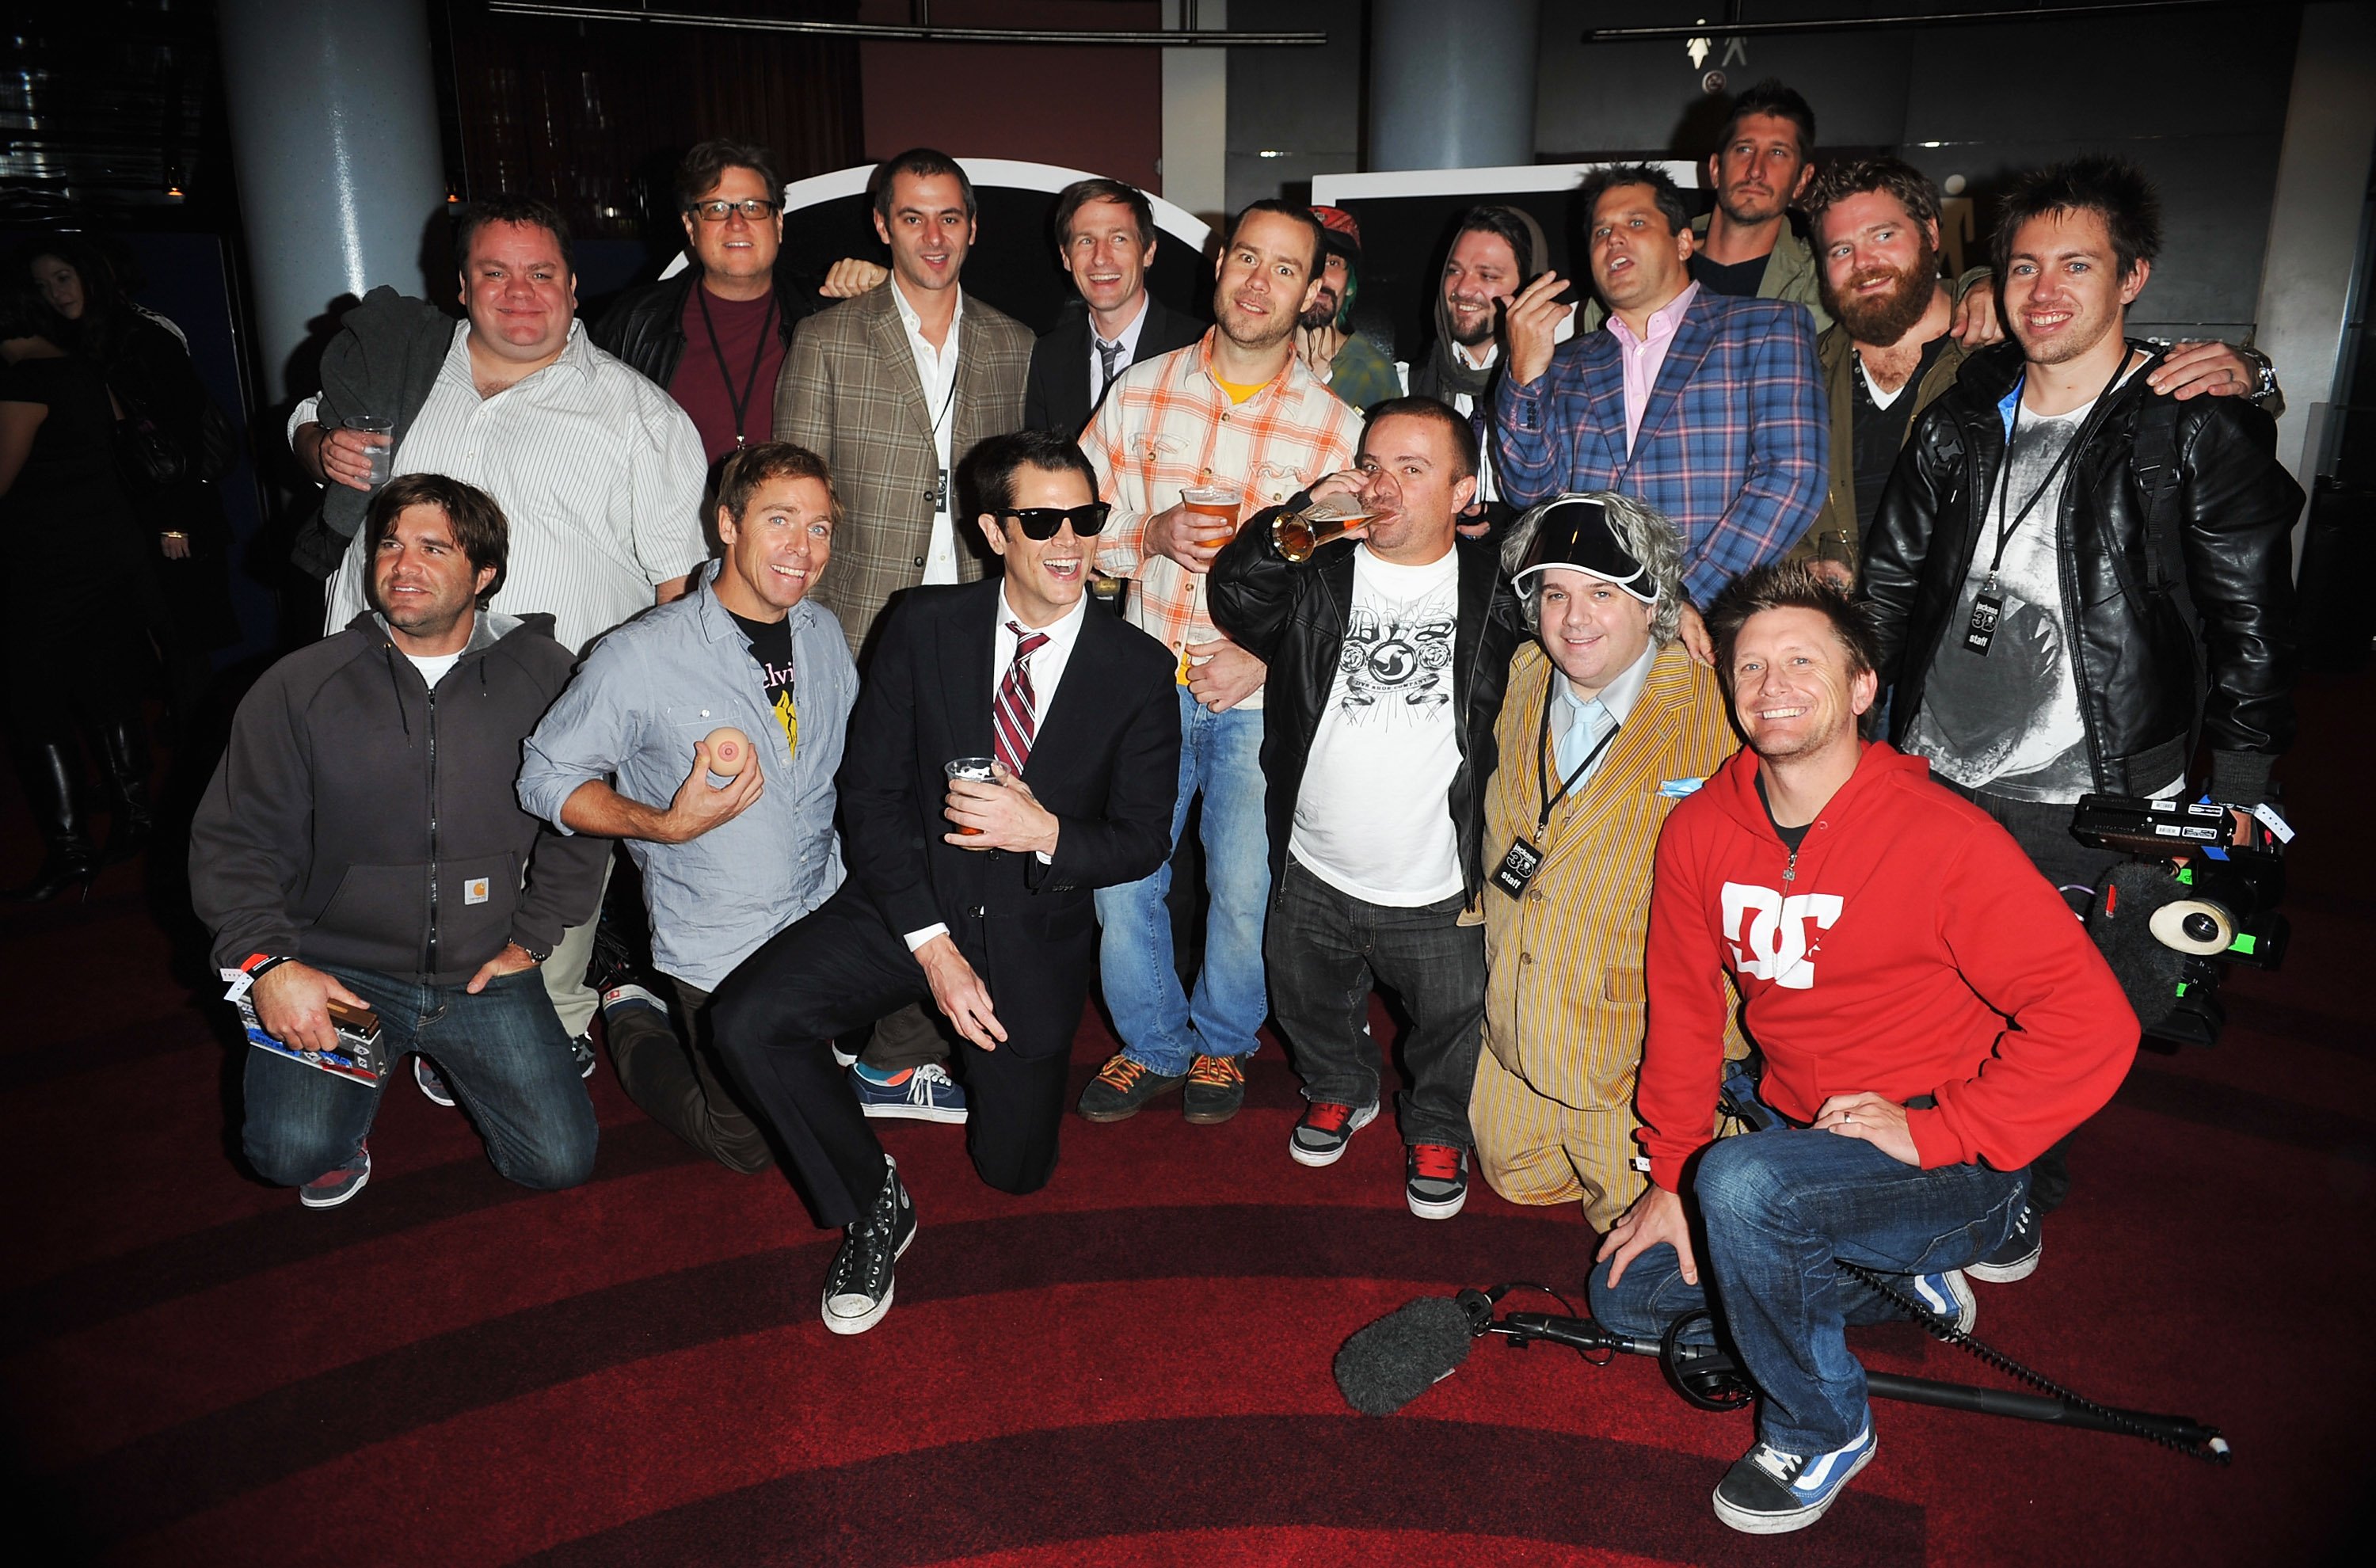 Johnny Knoxville (front row 3rdL) and cast members at the UK film premiere of “Jackass 3D” at the BFI IMAX on November 2, 2010, in London, England | Photo: Stuart Wilson/Getty Images